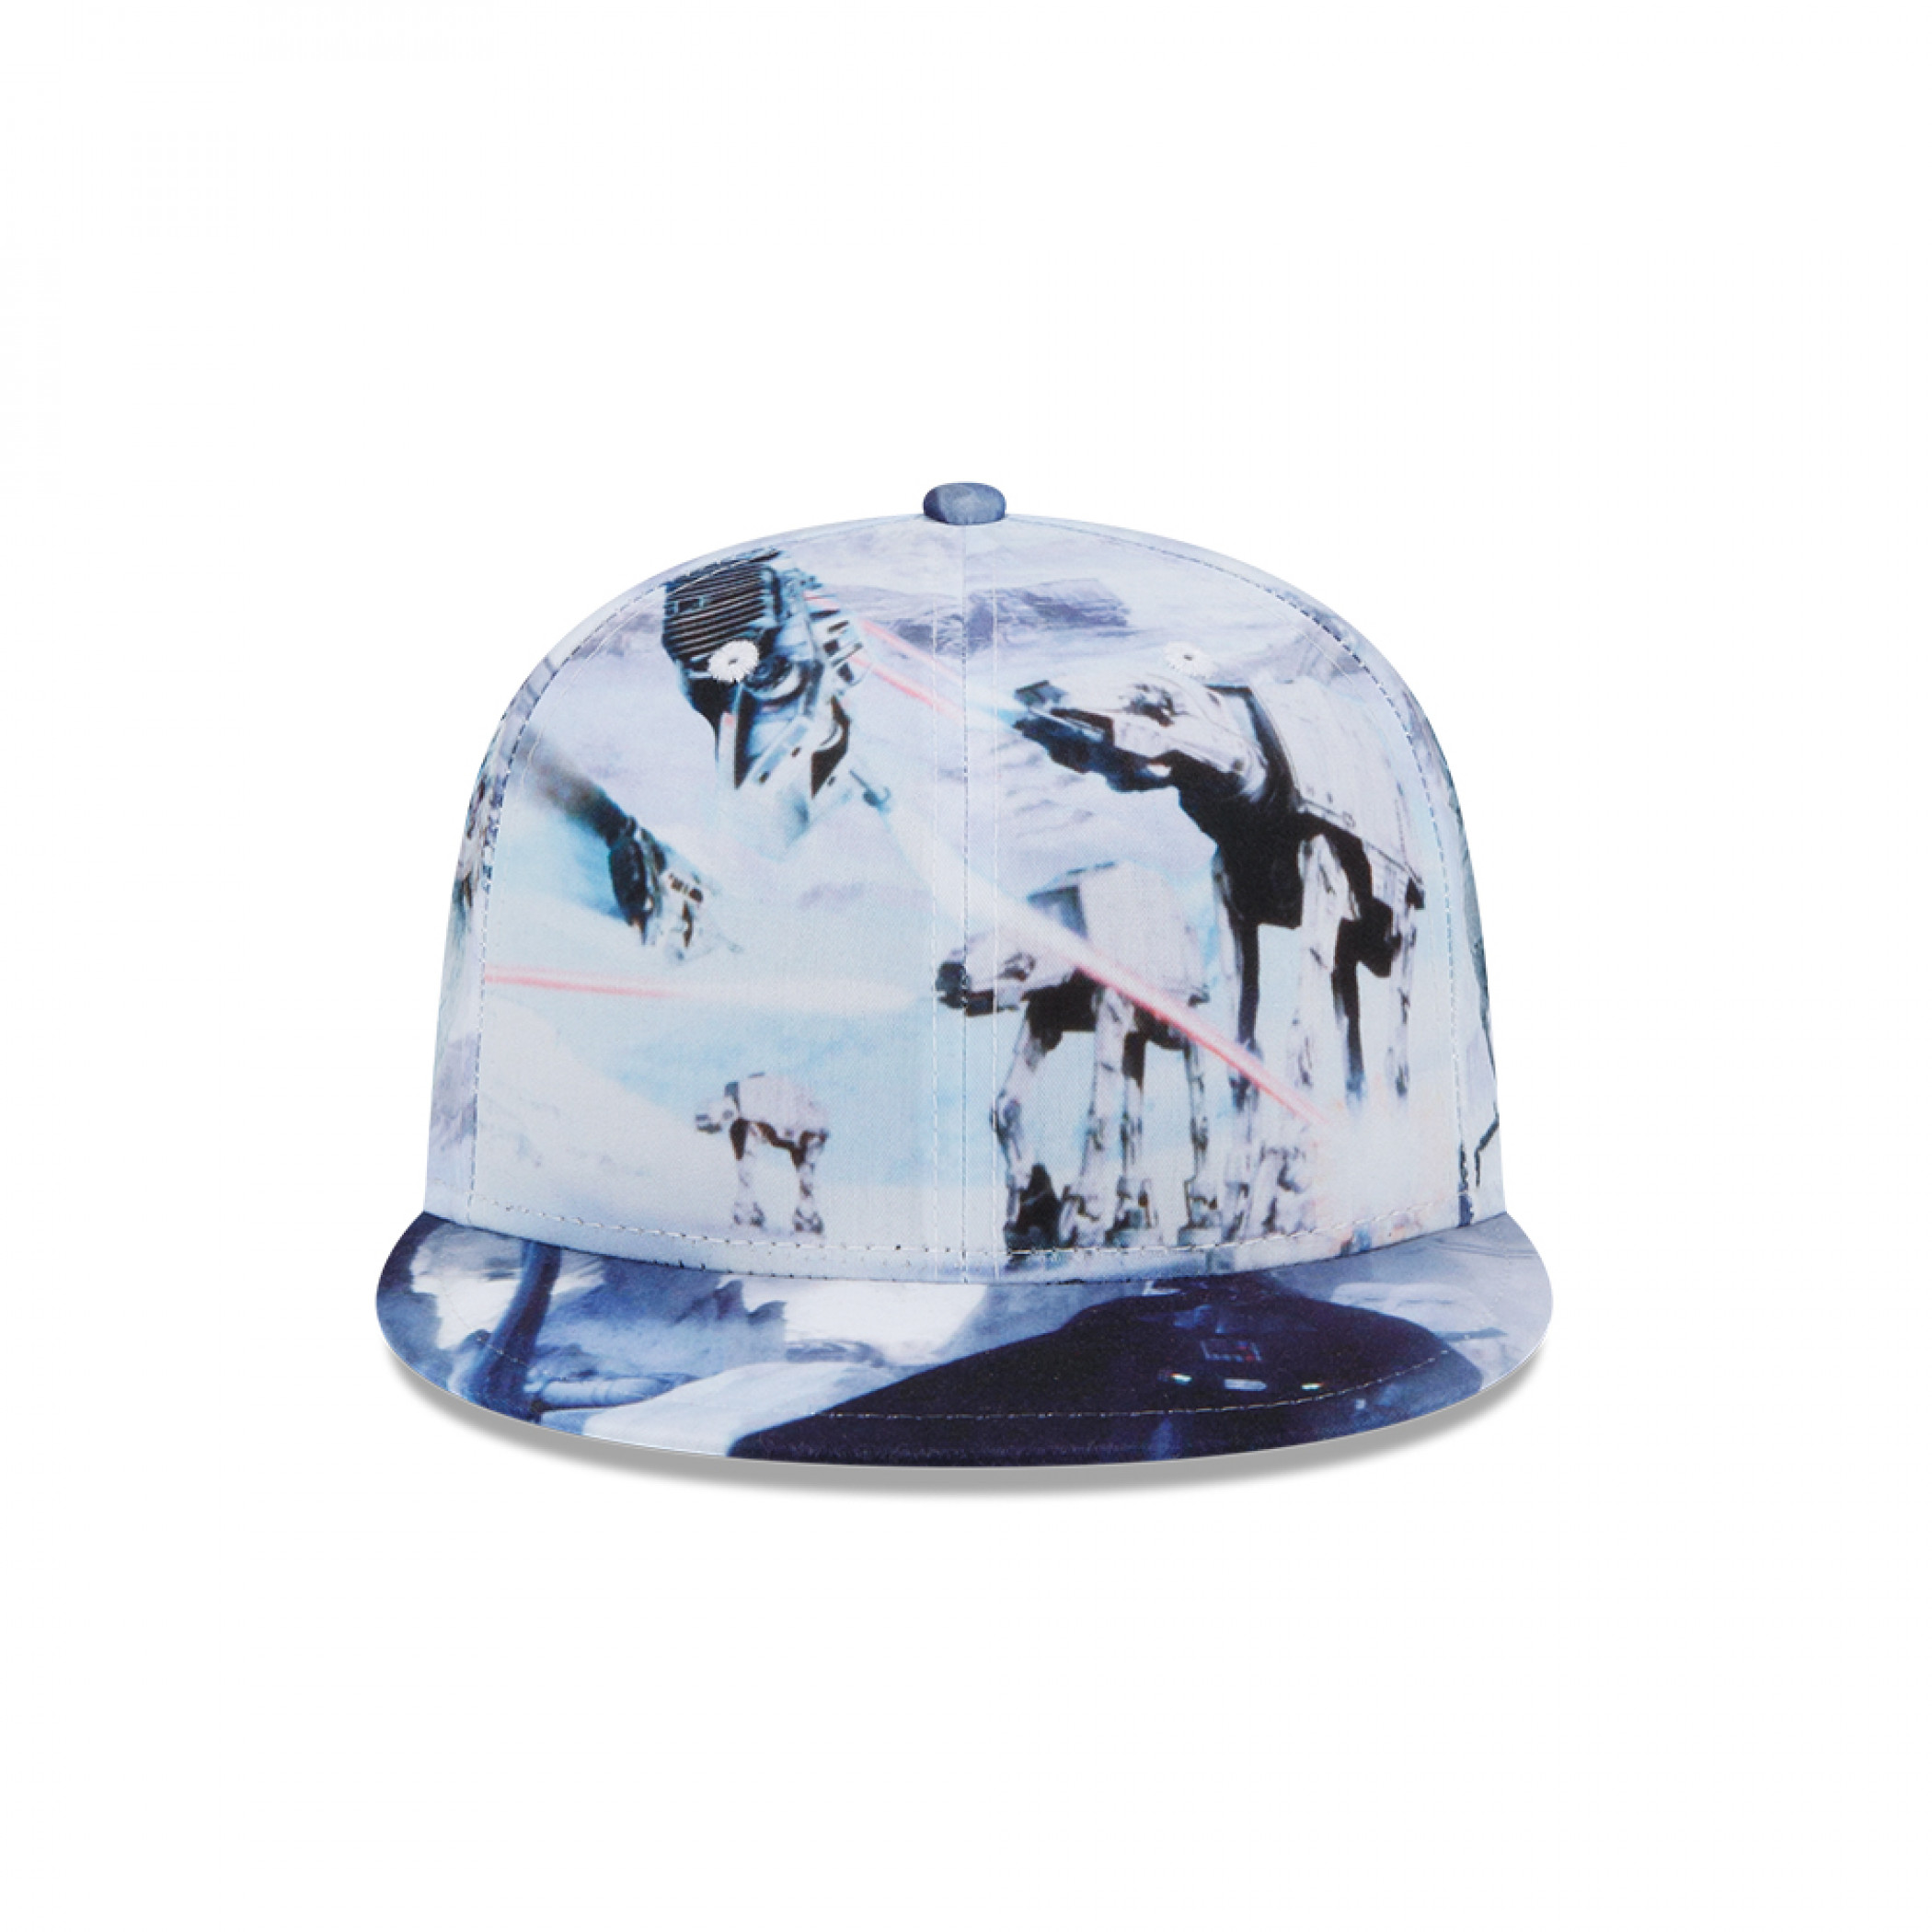 Star Wars Empire Strikes Back Hoth Battle New Era 59Fifty Fitted Hat